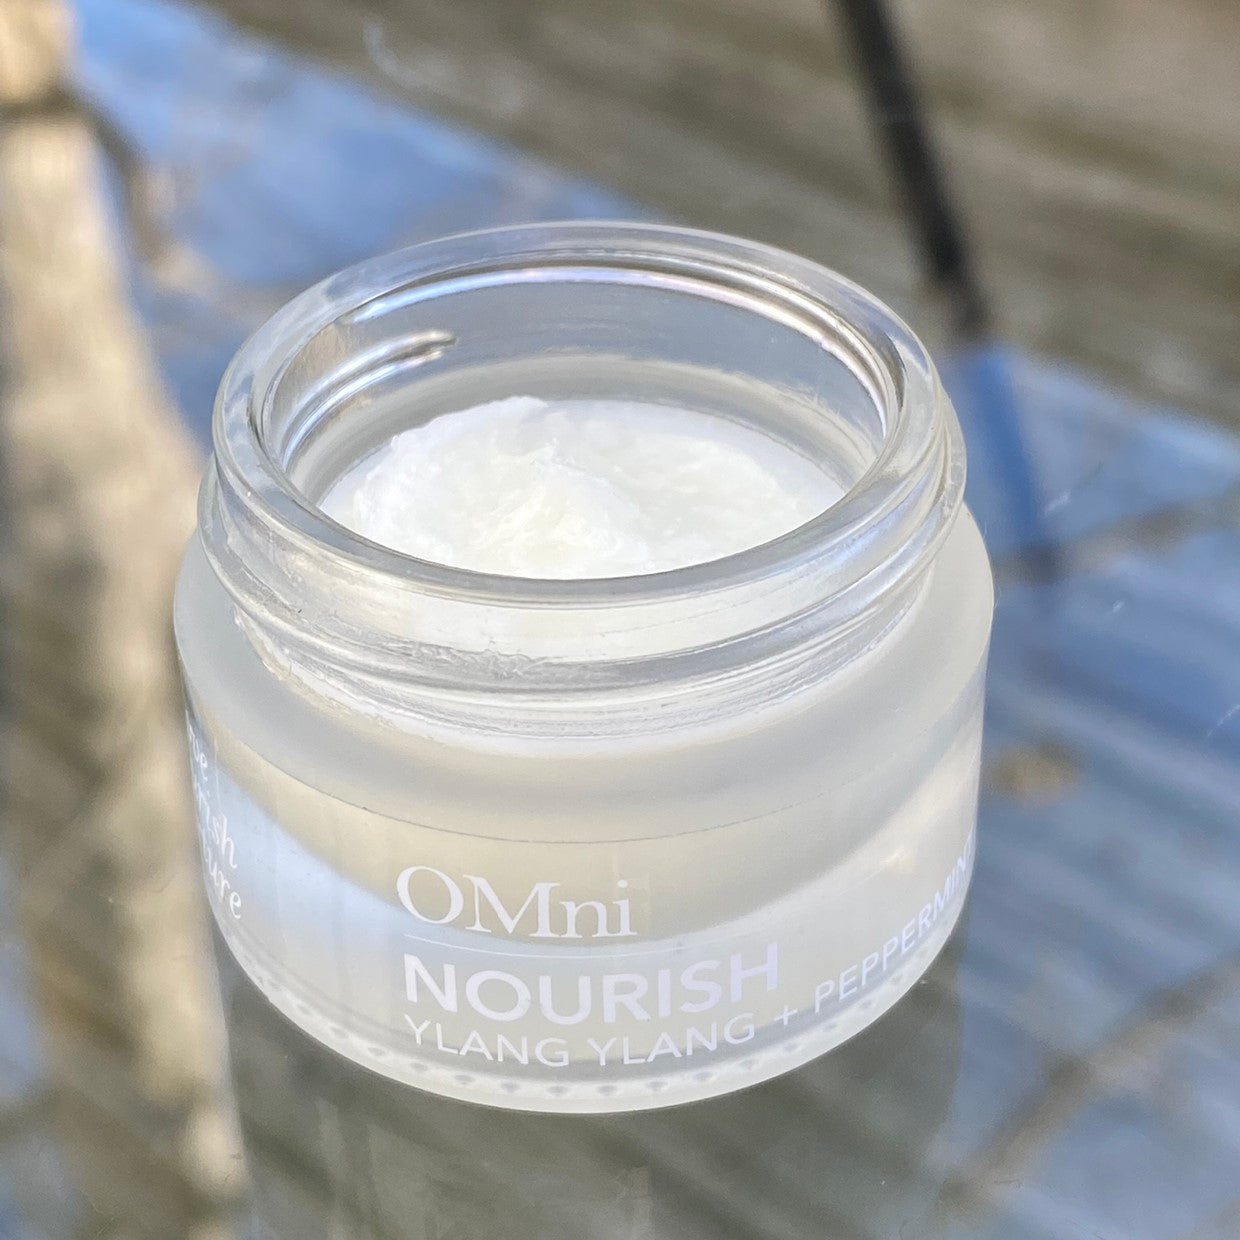 OMni Nourish natural multi-use balm for dry lips and skin #3